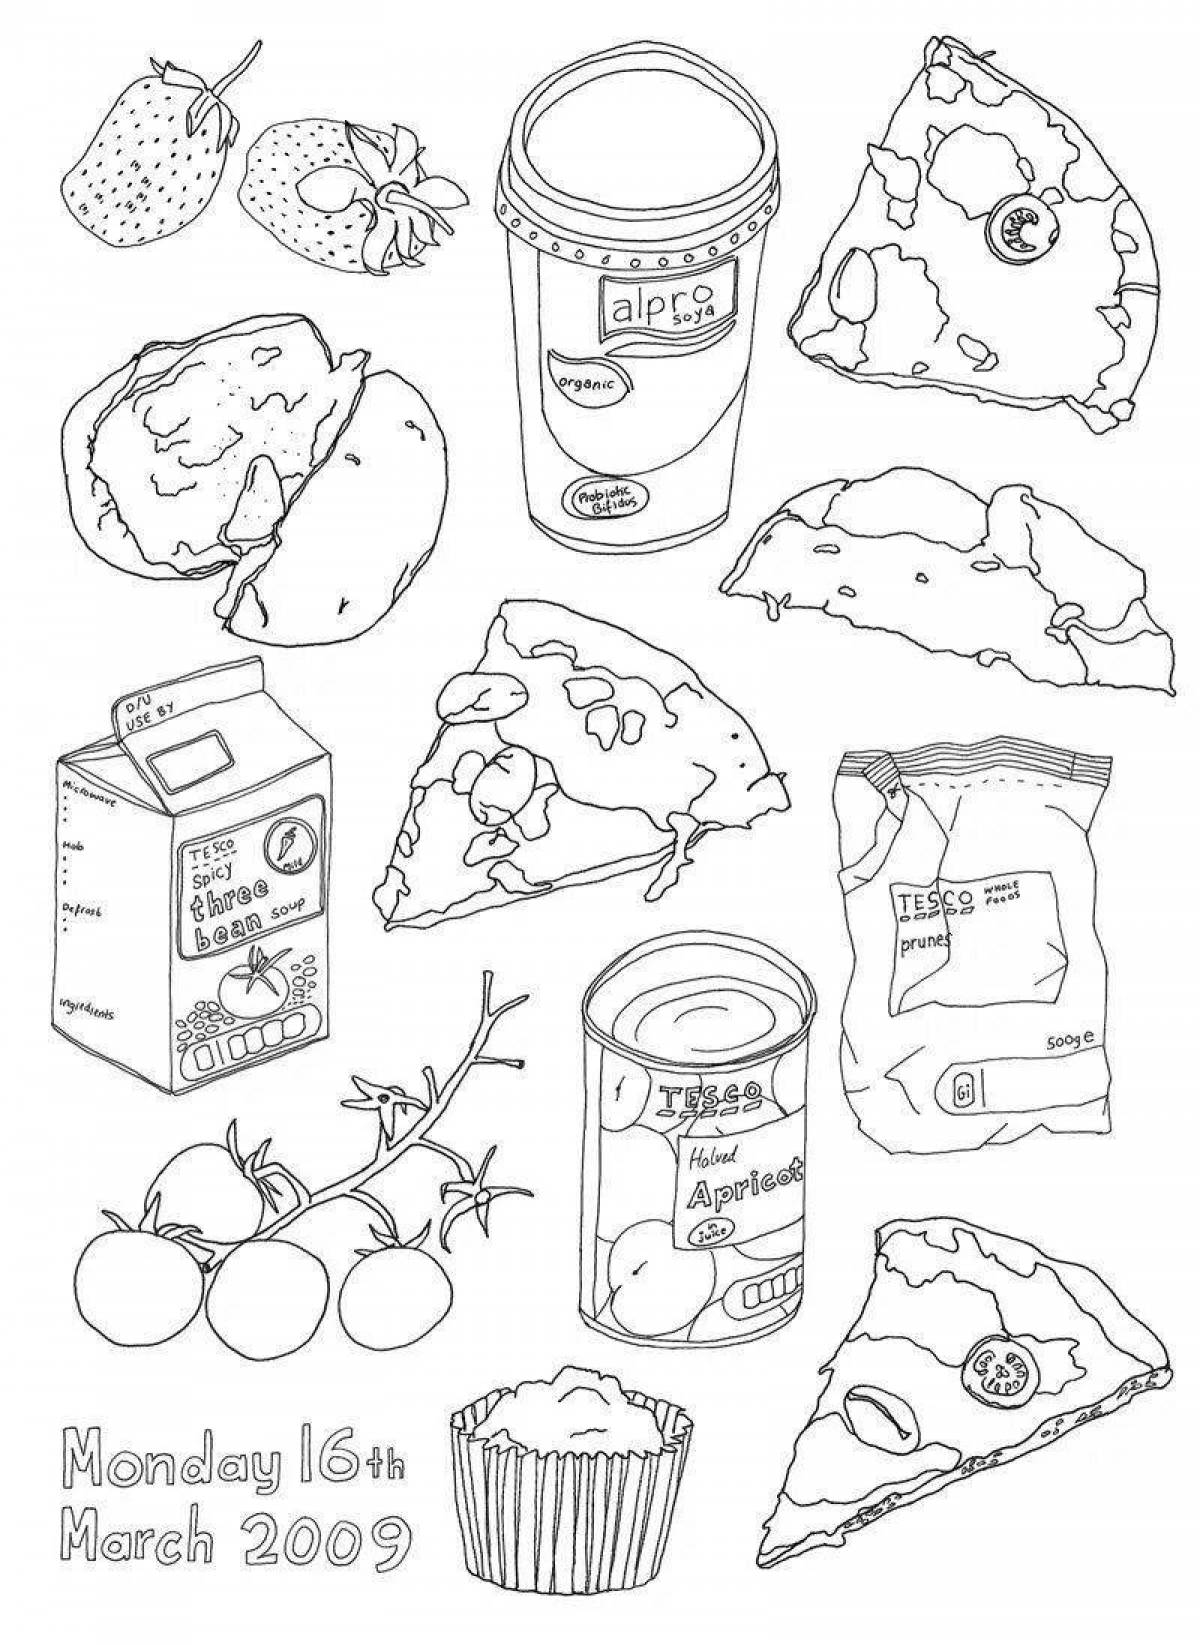 Fun ooty lalafanfan food coloring page